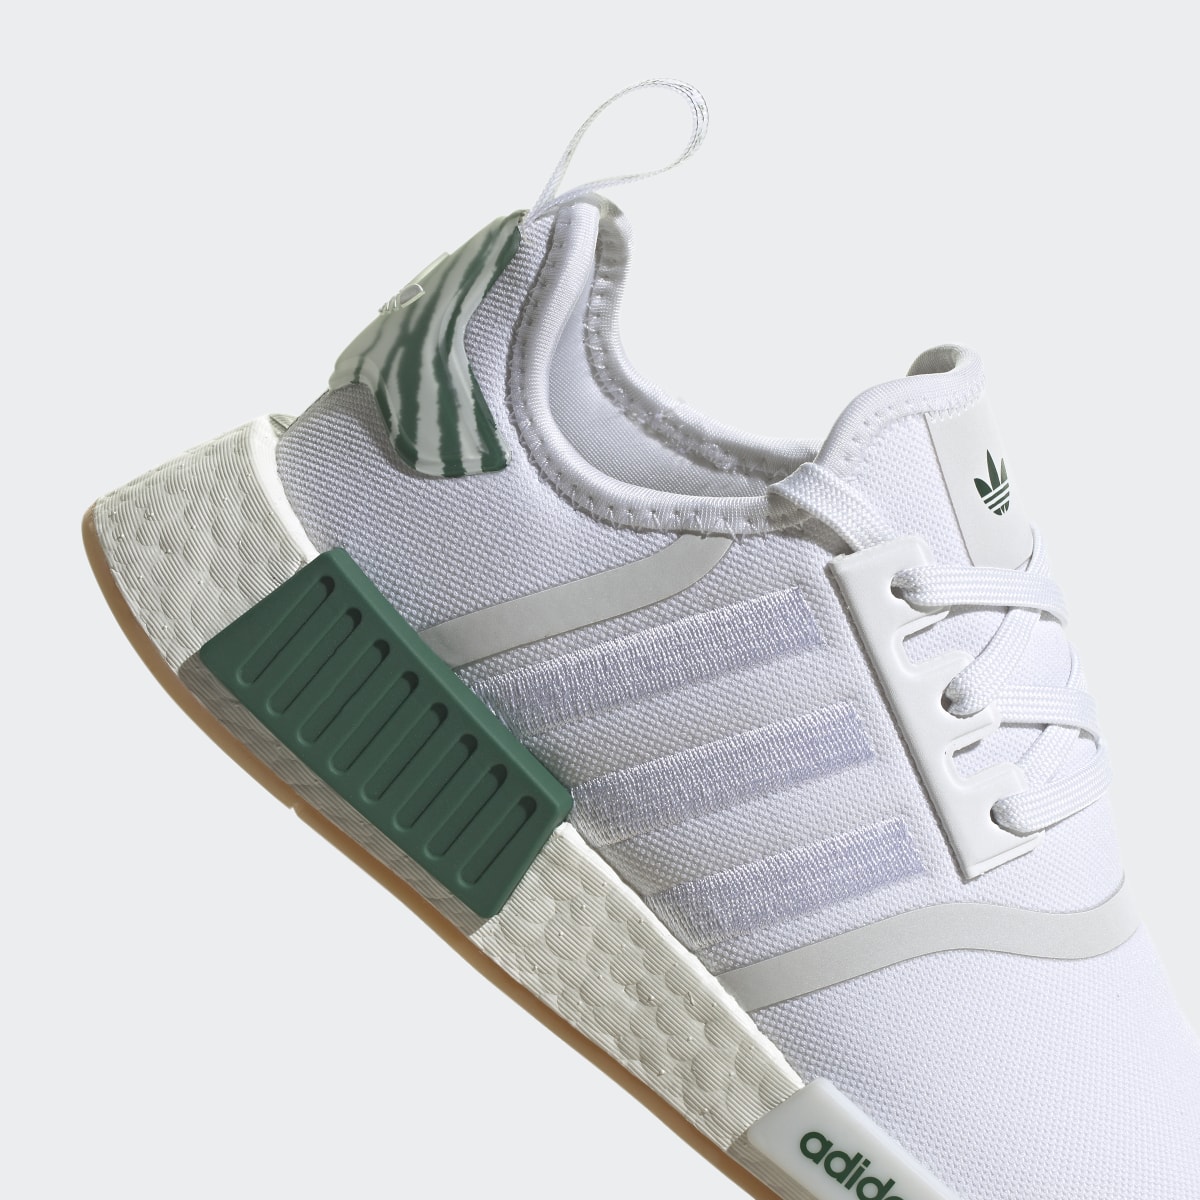 Adidas NMD_R1 Shoes. 4